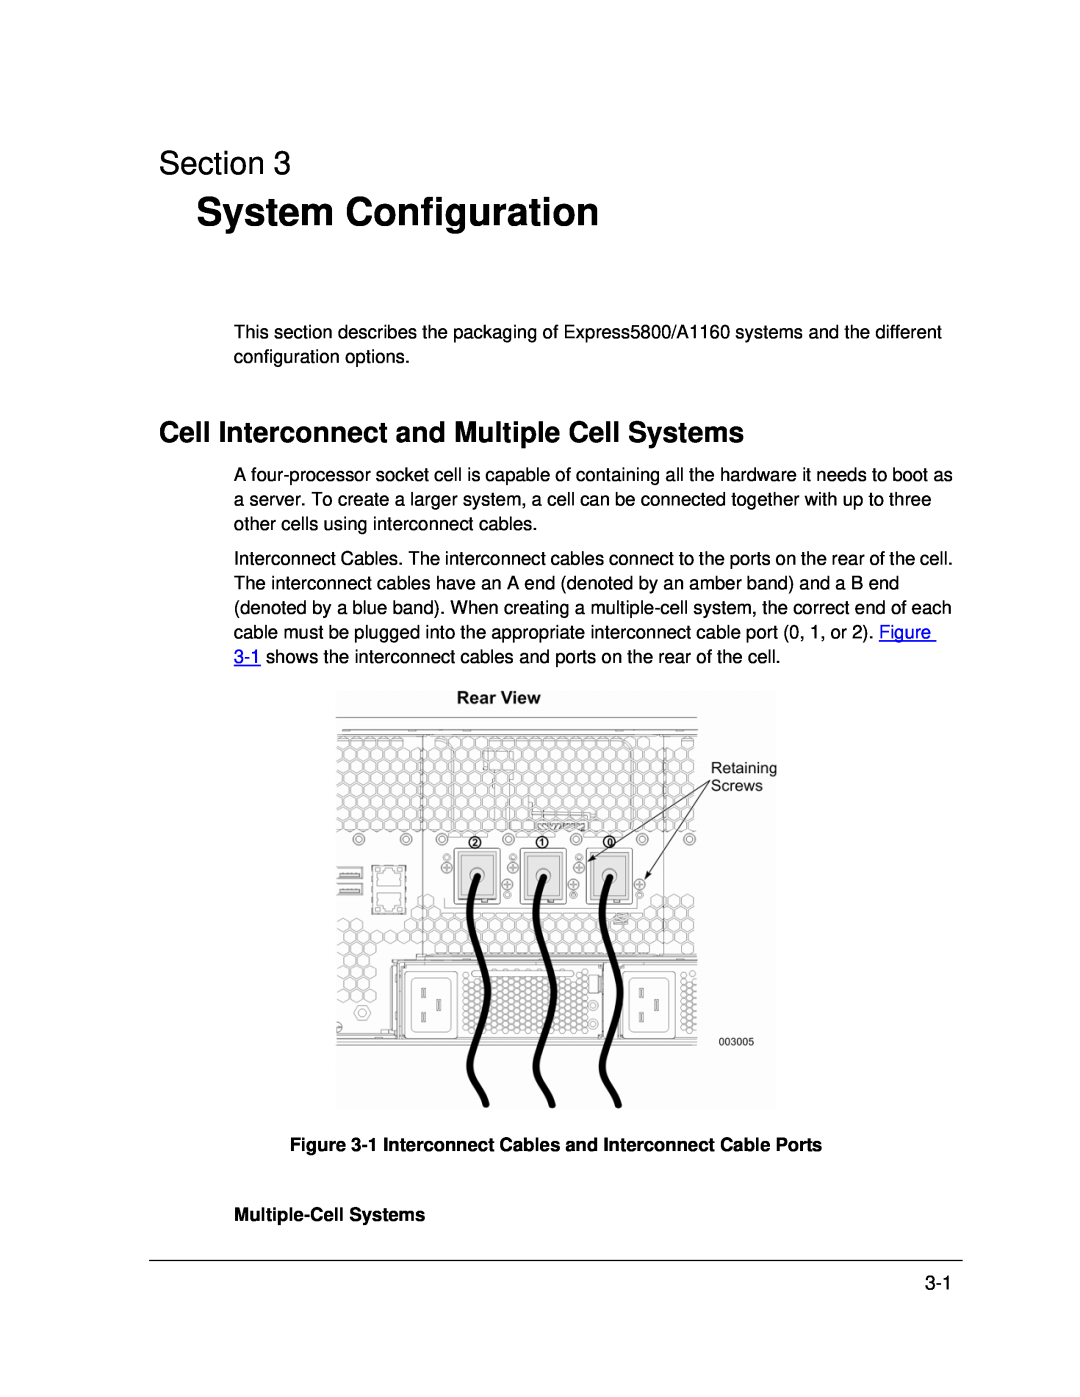 NEC A1160 manual System Configuration, Cell Interconnect and Multiple Cell Systems, Section, Multiple-CellSystems 